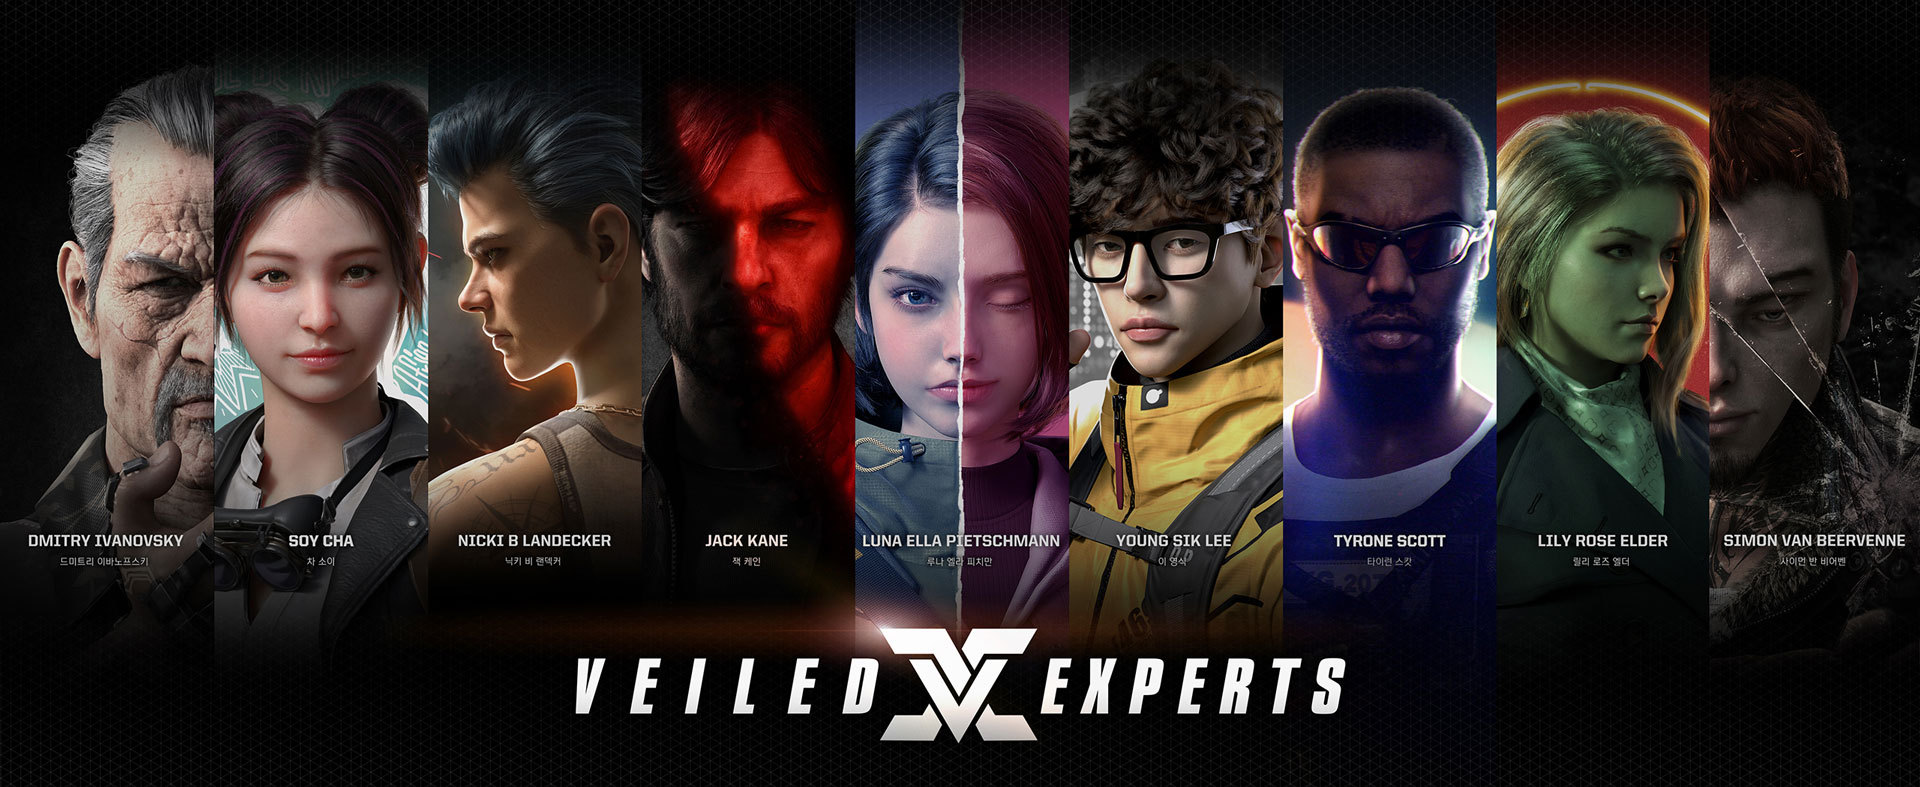 Veiled Experts, NEXON Games, Korean Gaming Company, NoobFeed, Multiplayer, Action Games